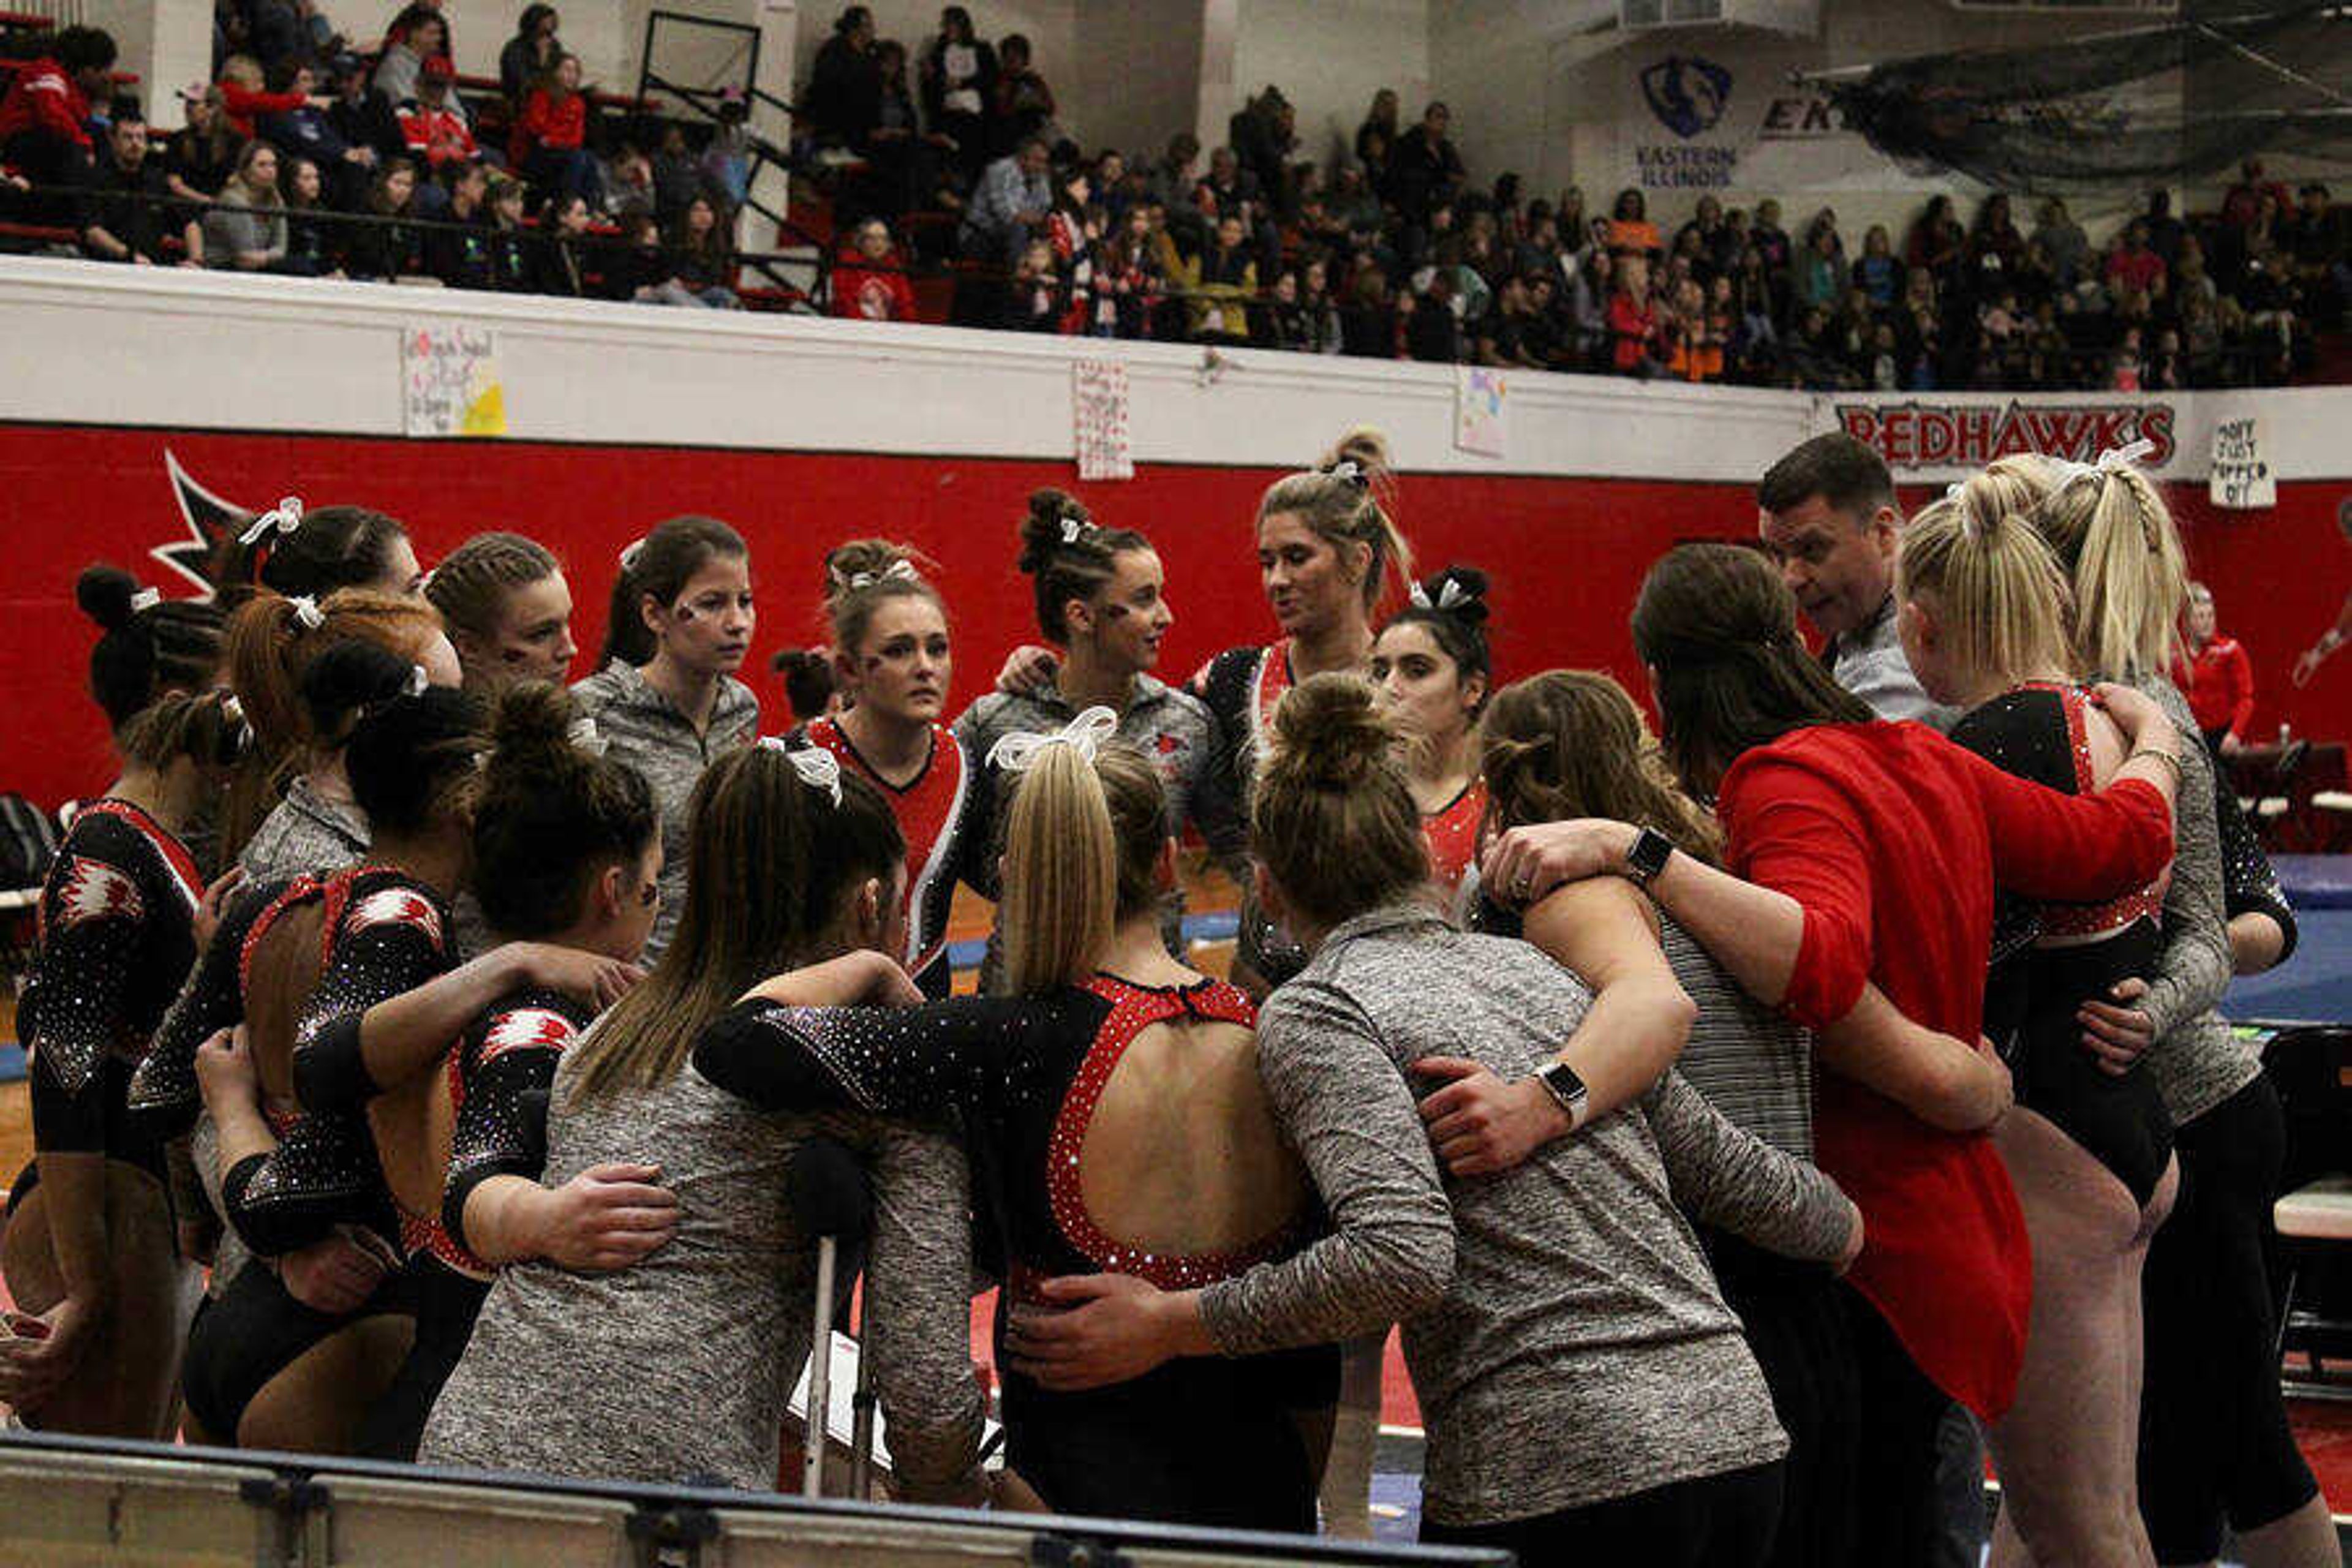 The Redhawks gymnastics team huddles before a match on Jan. 31, 2020 against Illinois State. Heidi Vanderboom joins Southeast following their 10-7 campaign.